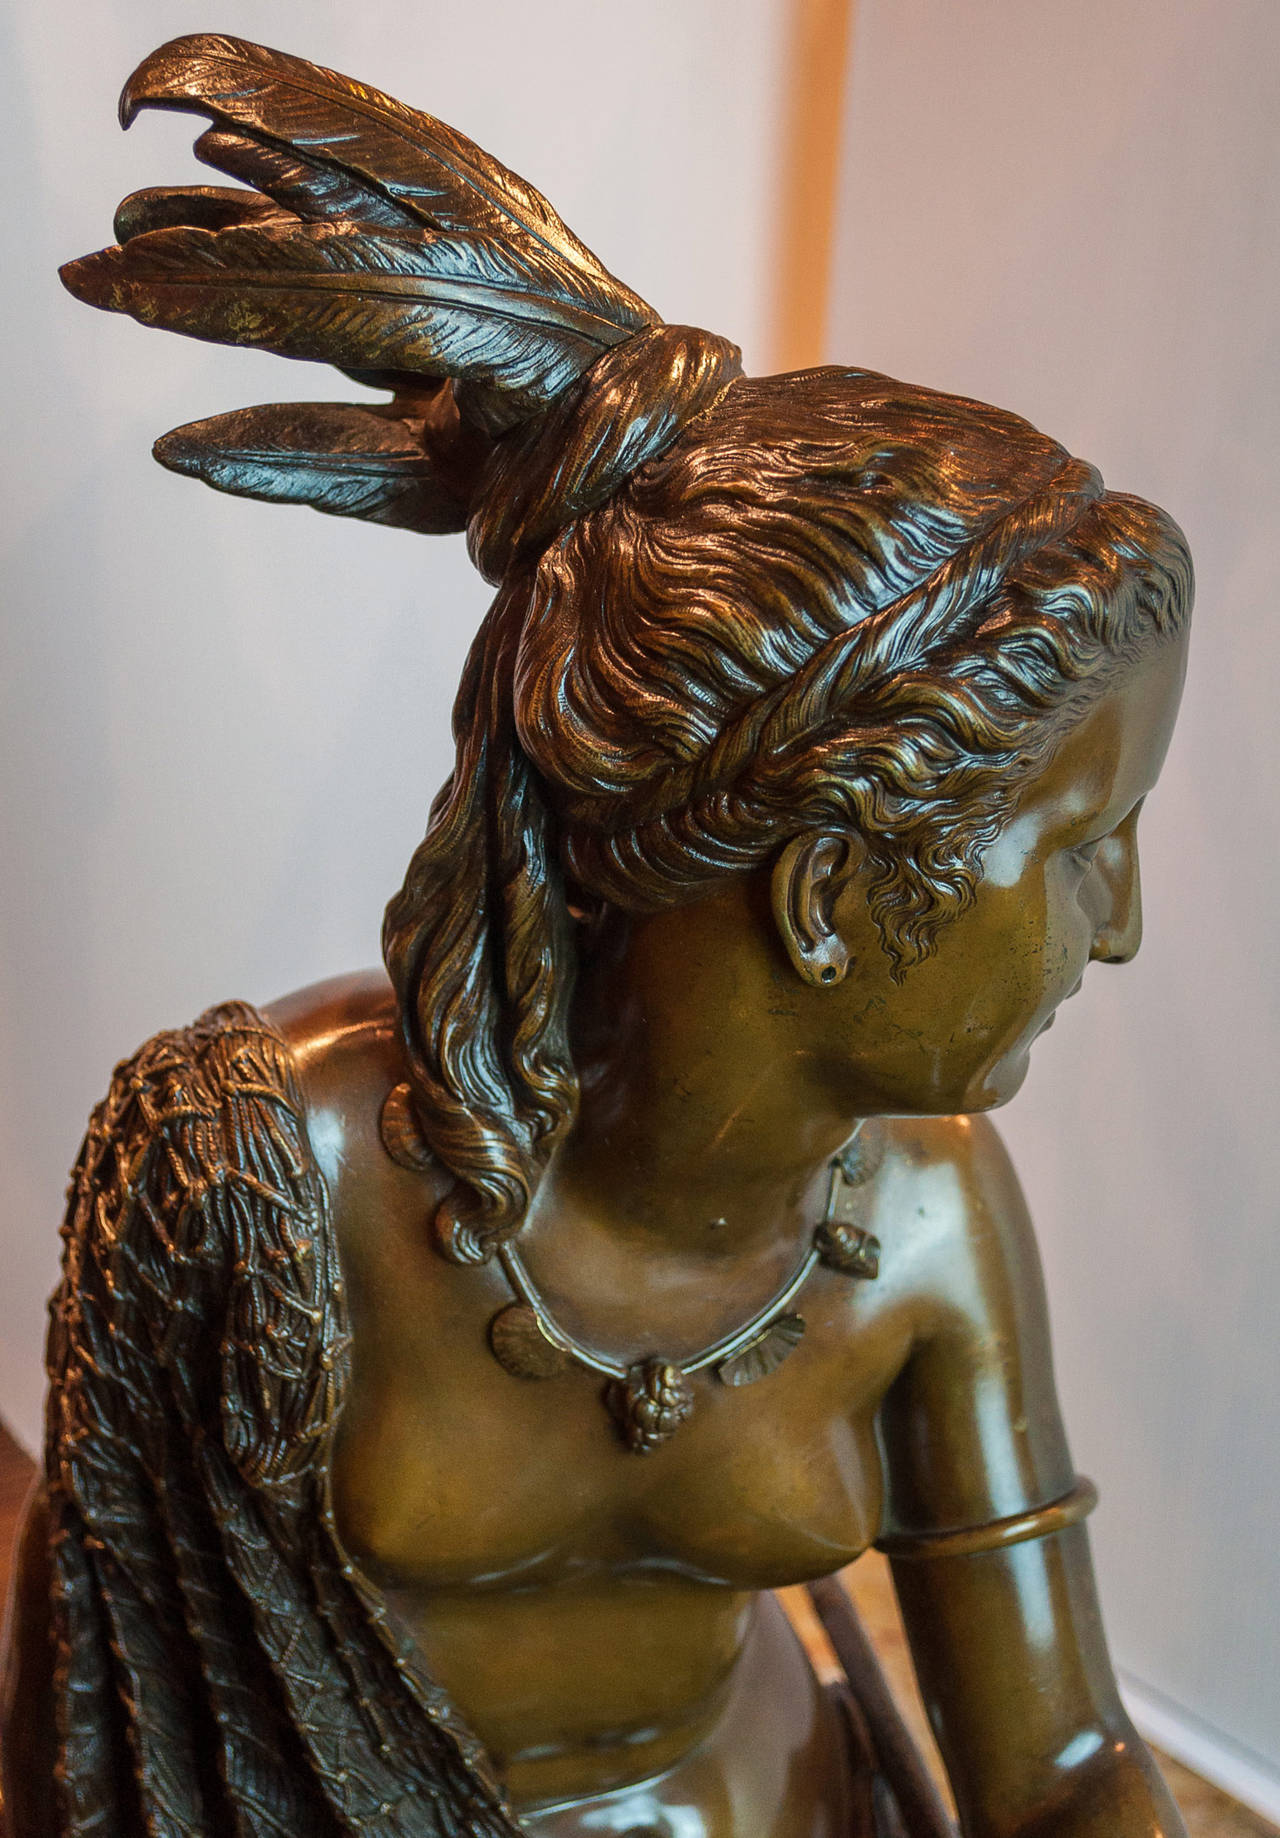 A Large Bronze Sculpture of a Beautiful Native American Indian Maiden sitting in a Canoe on a marble pedestal base.
Signed: Duchoiselle
Stock Number: SC78